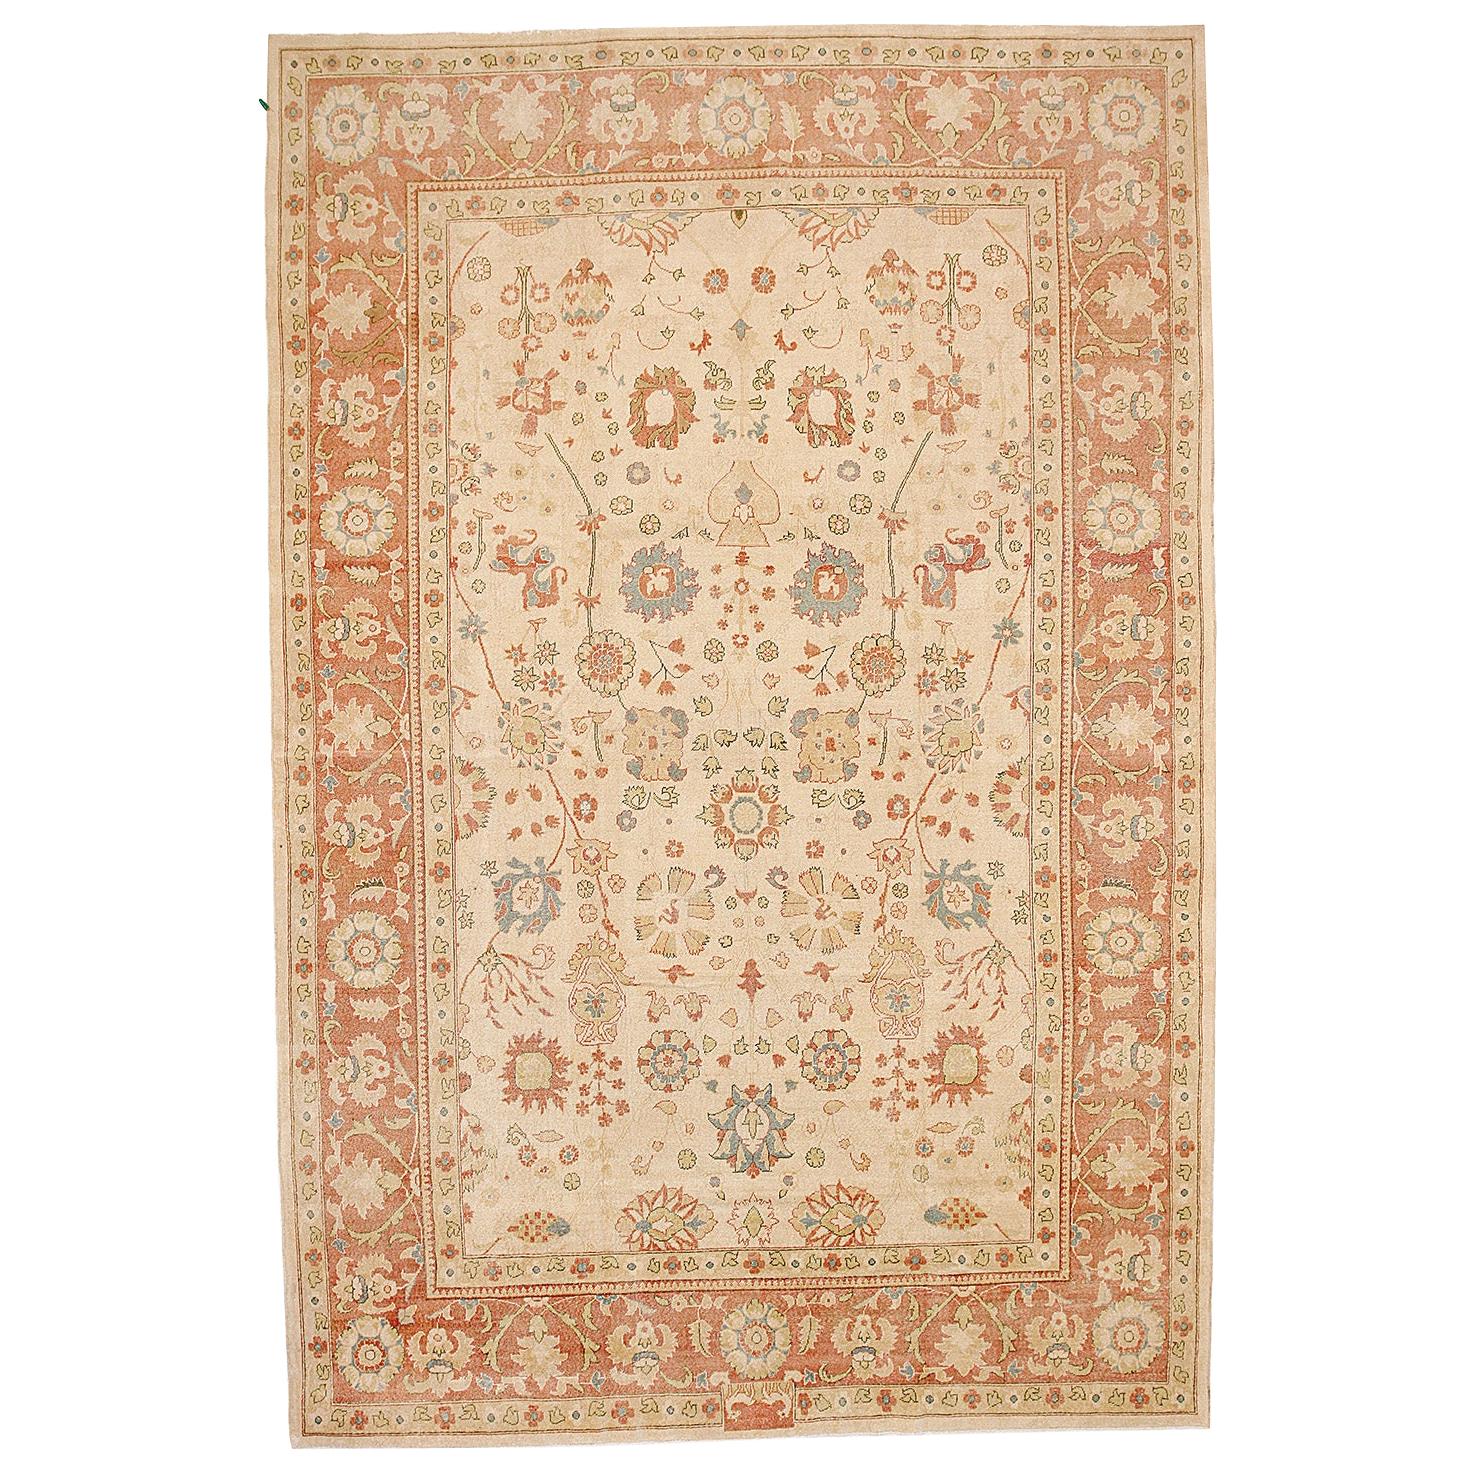 New Persian Sultanabad Rug with Blue and Salmon Pink Floral Motifs